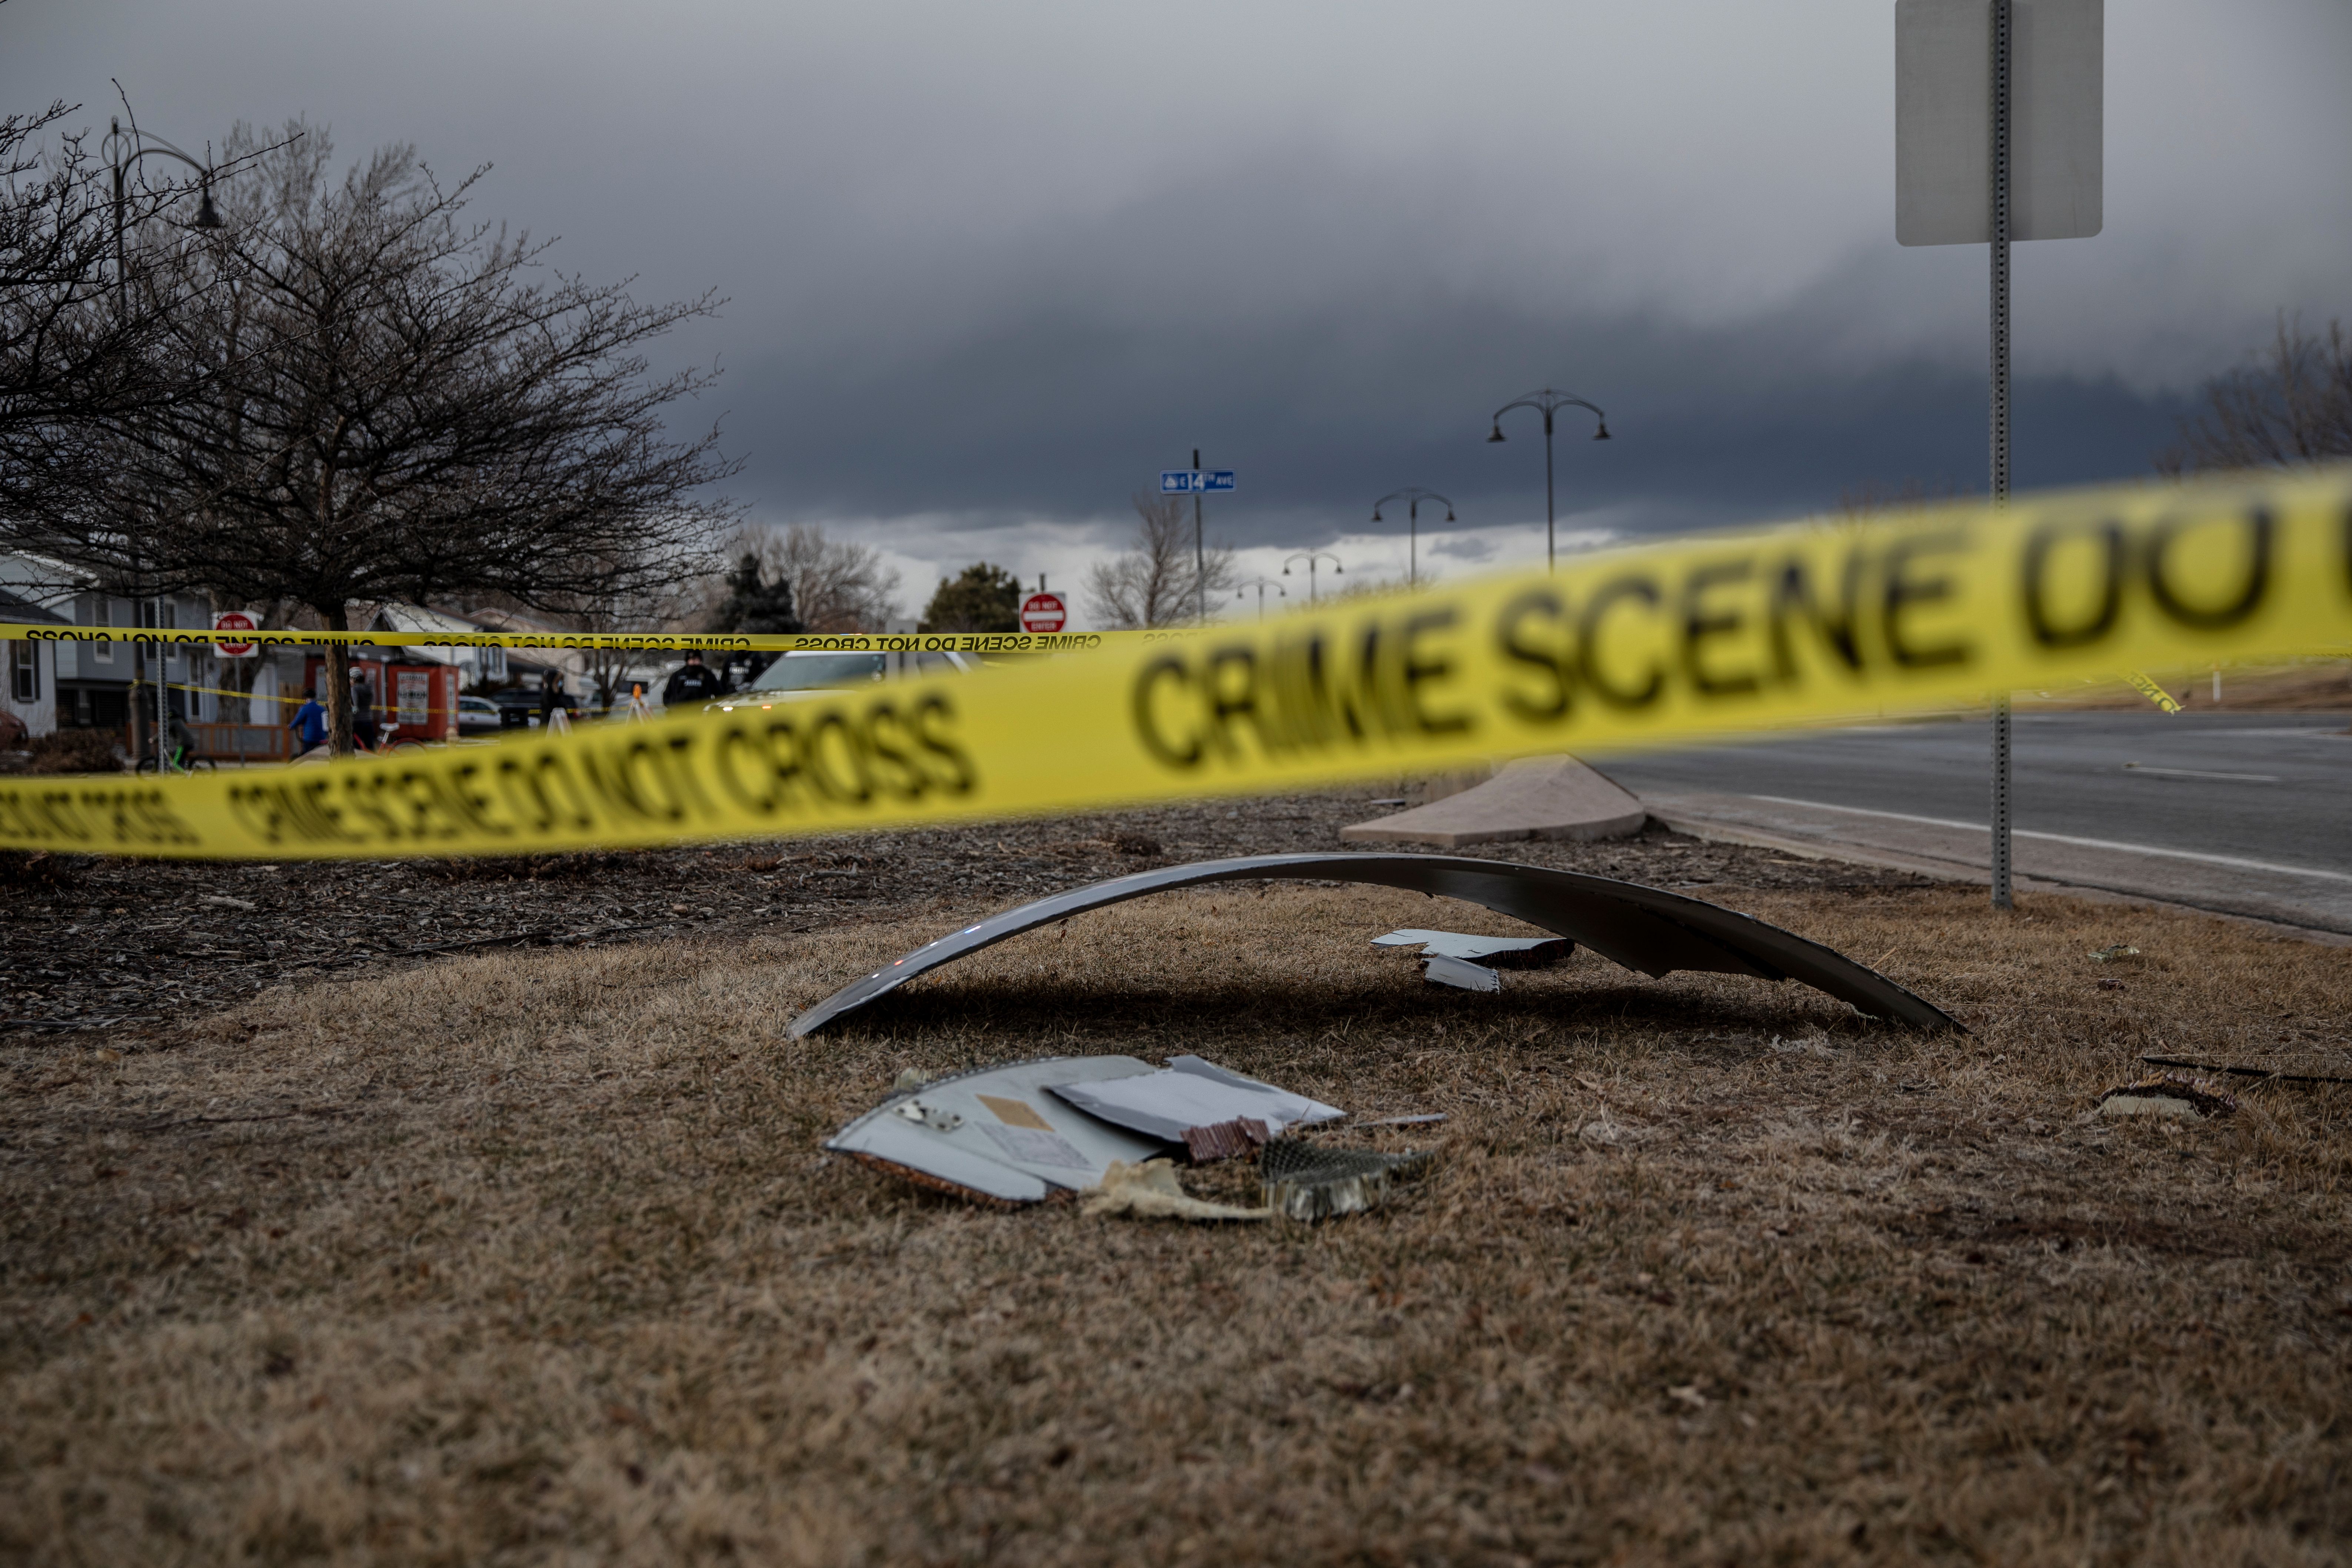 Debris that has fallen from a United Airlines Flight 328 airplane's engine lay scattered through the neighborhood of Broomfield, outside Denver, Colorado, on February 20, 2021 | Photo: Getty Images